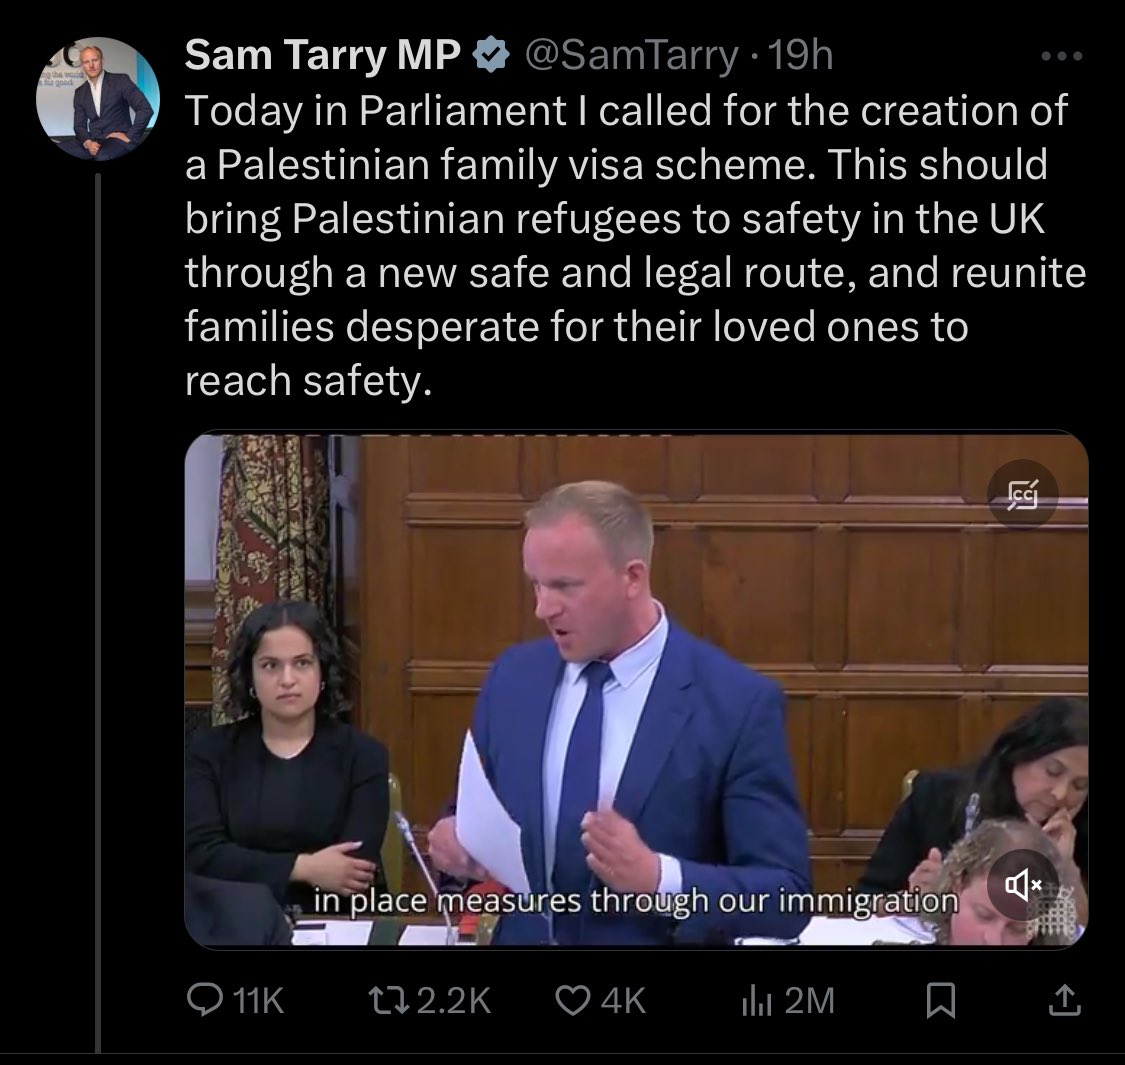 While the ratio against Tarry is pleasing to see, these planks in @UKLabour will ignore it and continue to double down on dangerous and damaging ideas like this. They will hasten the destruction of Britain, its way of life and its people as they sacrifice us on the altar of woke.